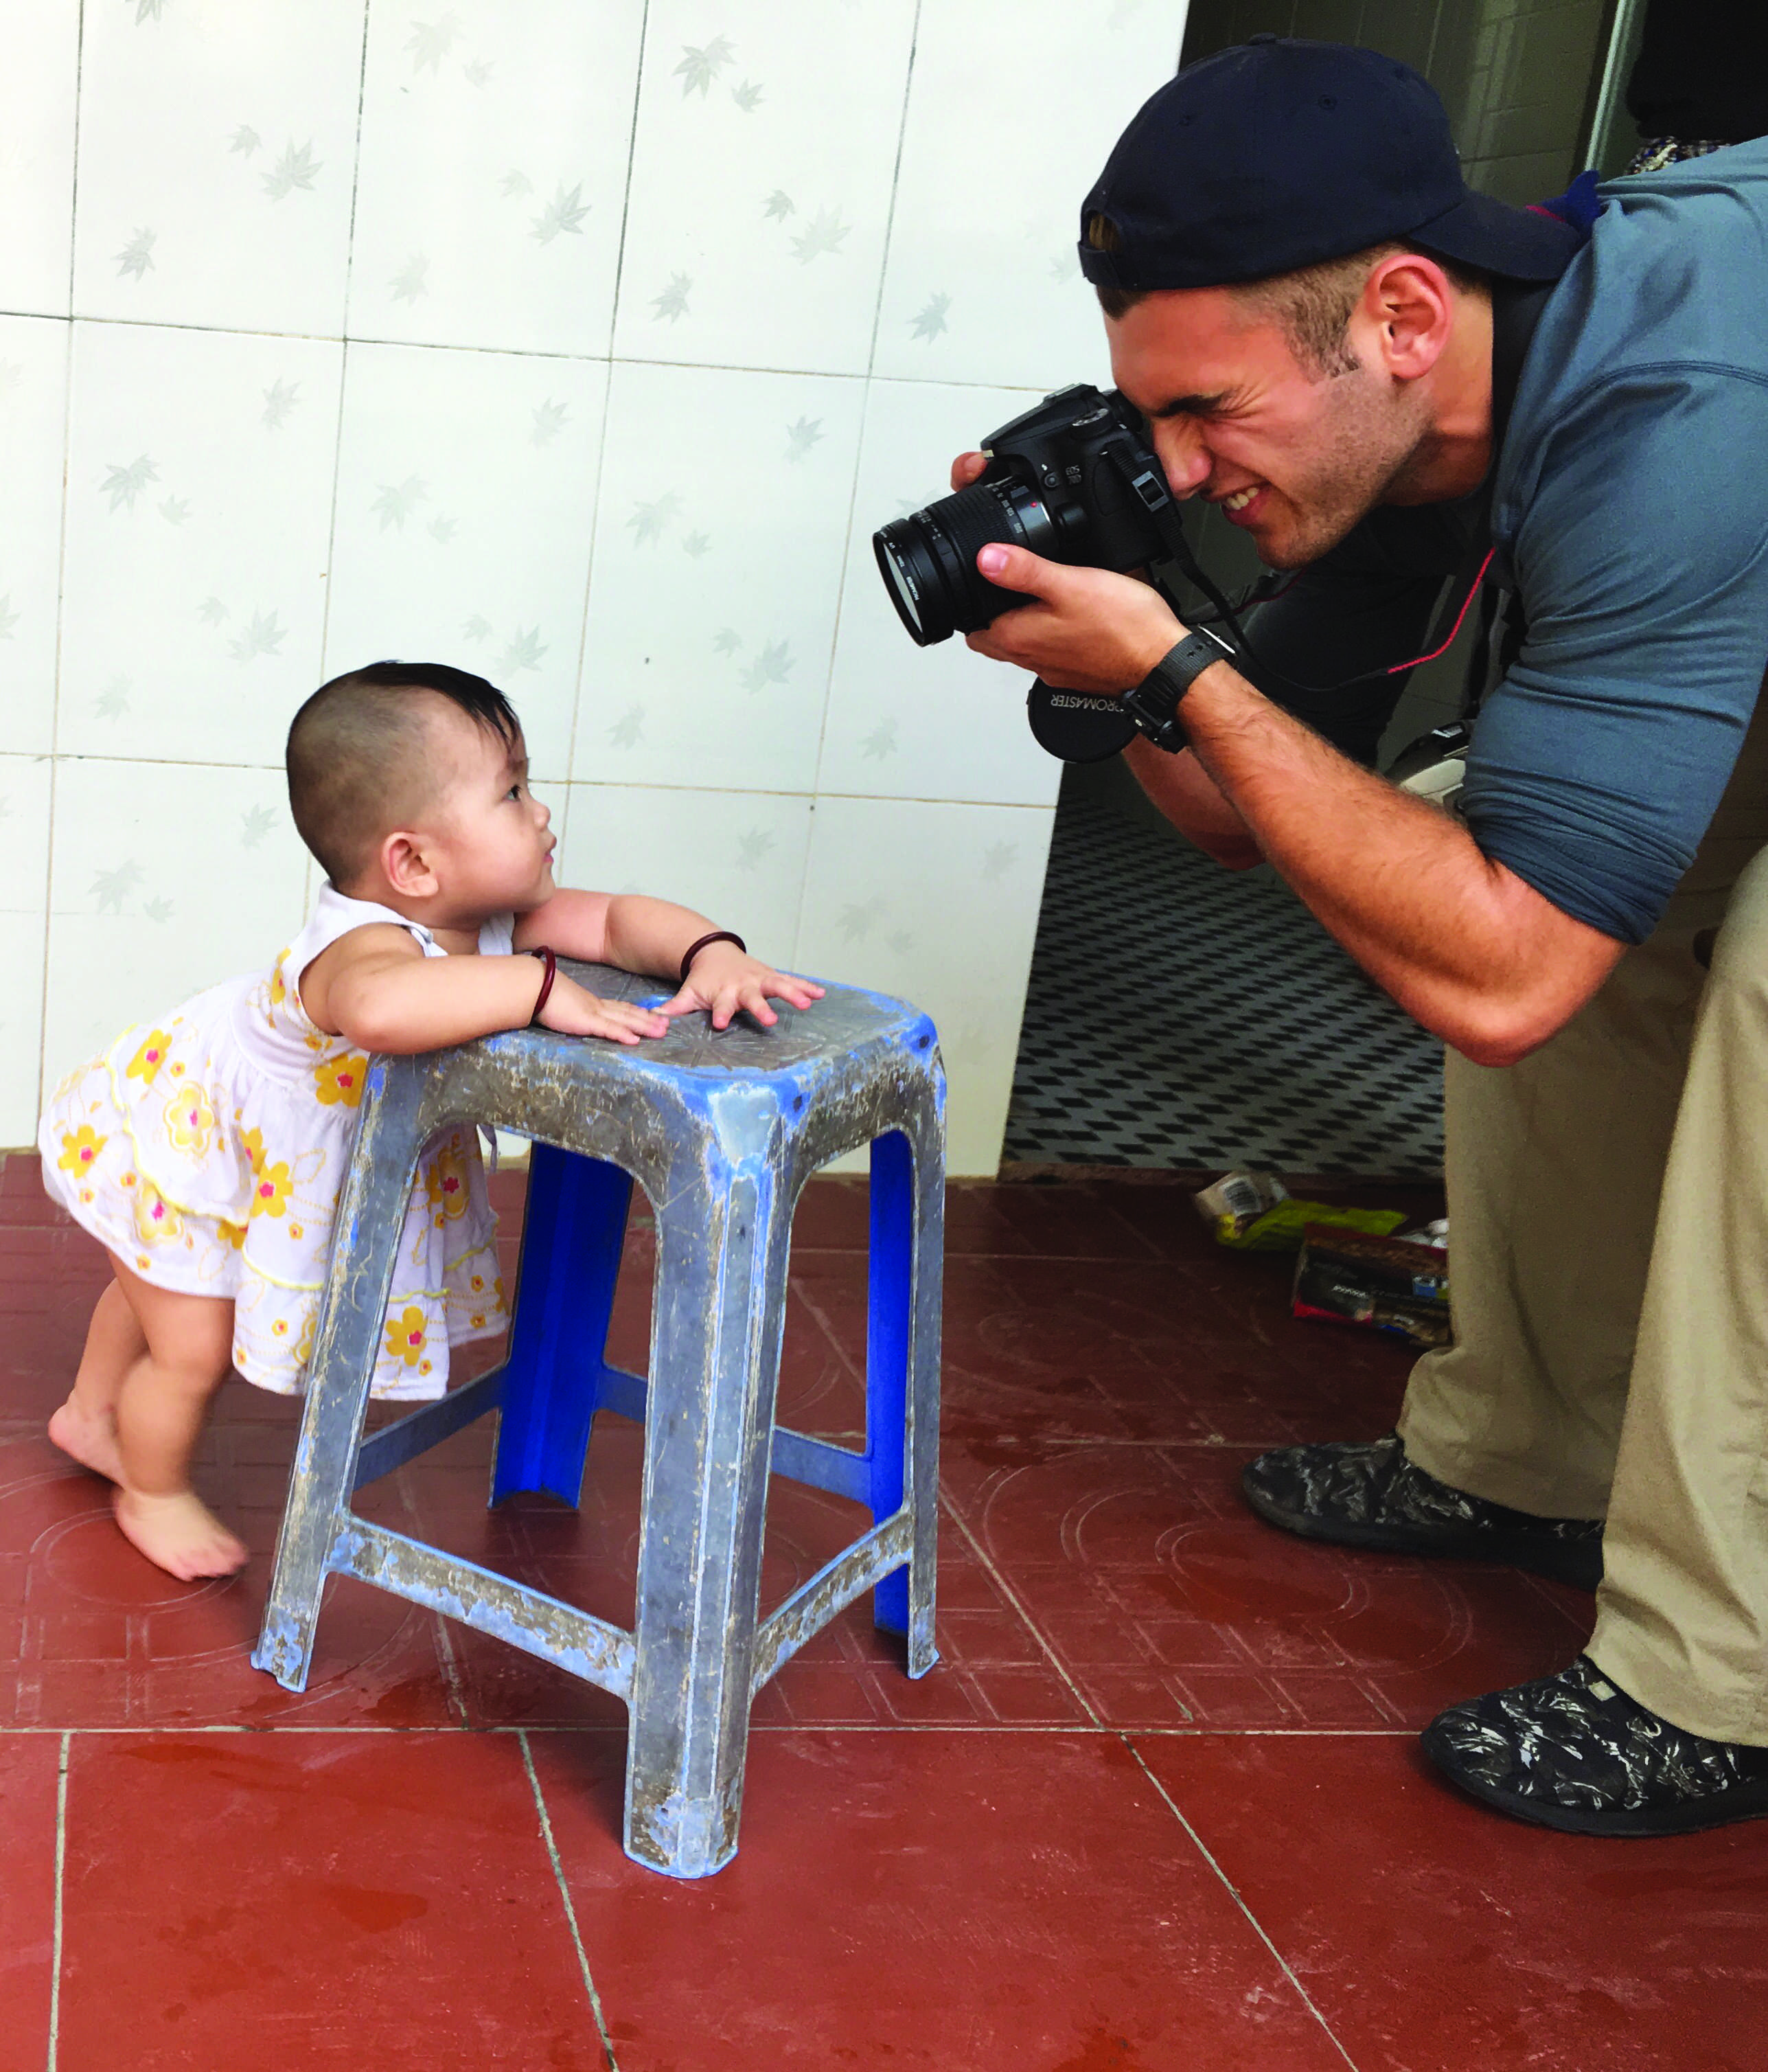 CAM AND HIS CAM: Cameron Welther ’17 photographs an infant at a Buddhist orphanage just outside of Saigon. Welther and 15 other students handed out toys and played with the children there. The orphanage was one of the many sites in Vietnam that the students who were on the Digital Storytelling Adventure trip visited. Credit: Lauren Kim/Chronicle